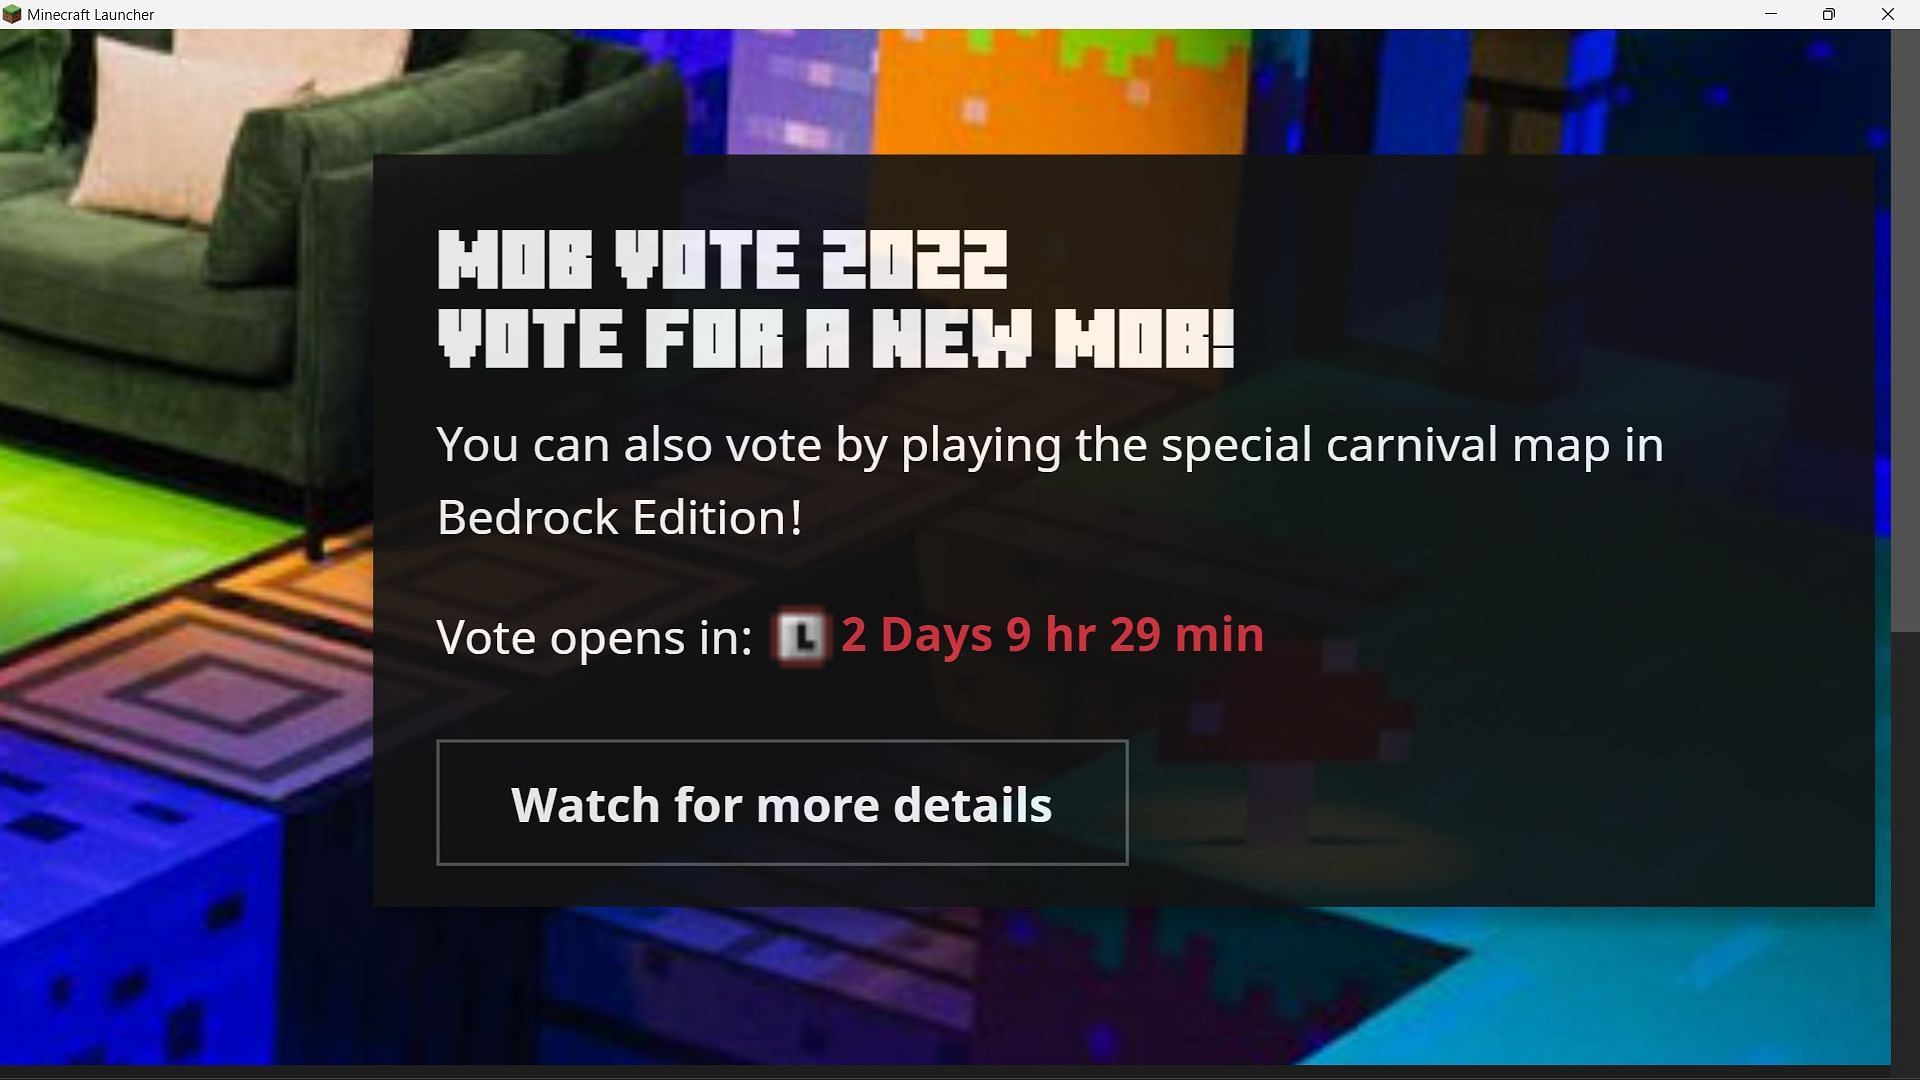 Fans can also vote for their favorite mob by playing a special carnival map inside Minecraft Bedrock Edition (Image via Mojang)